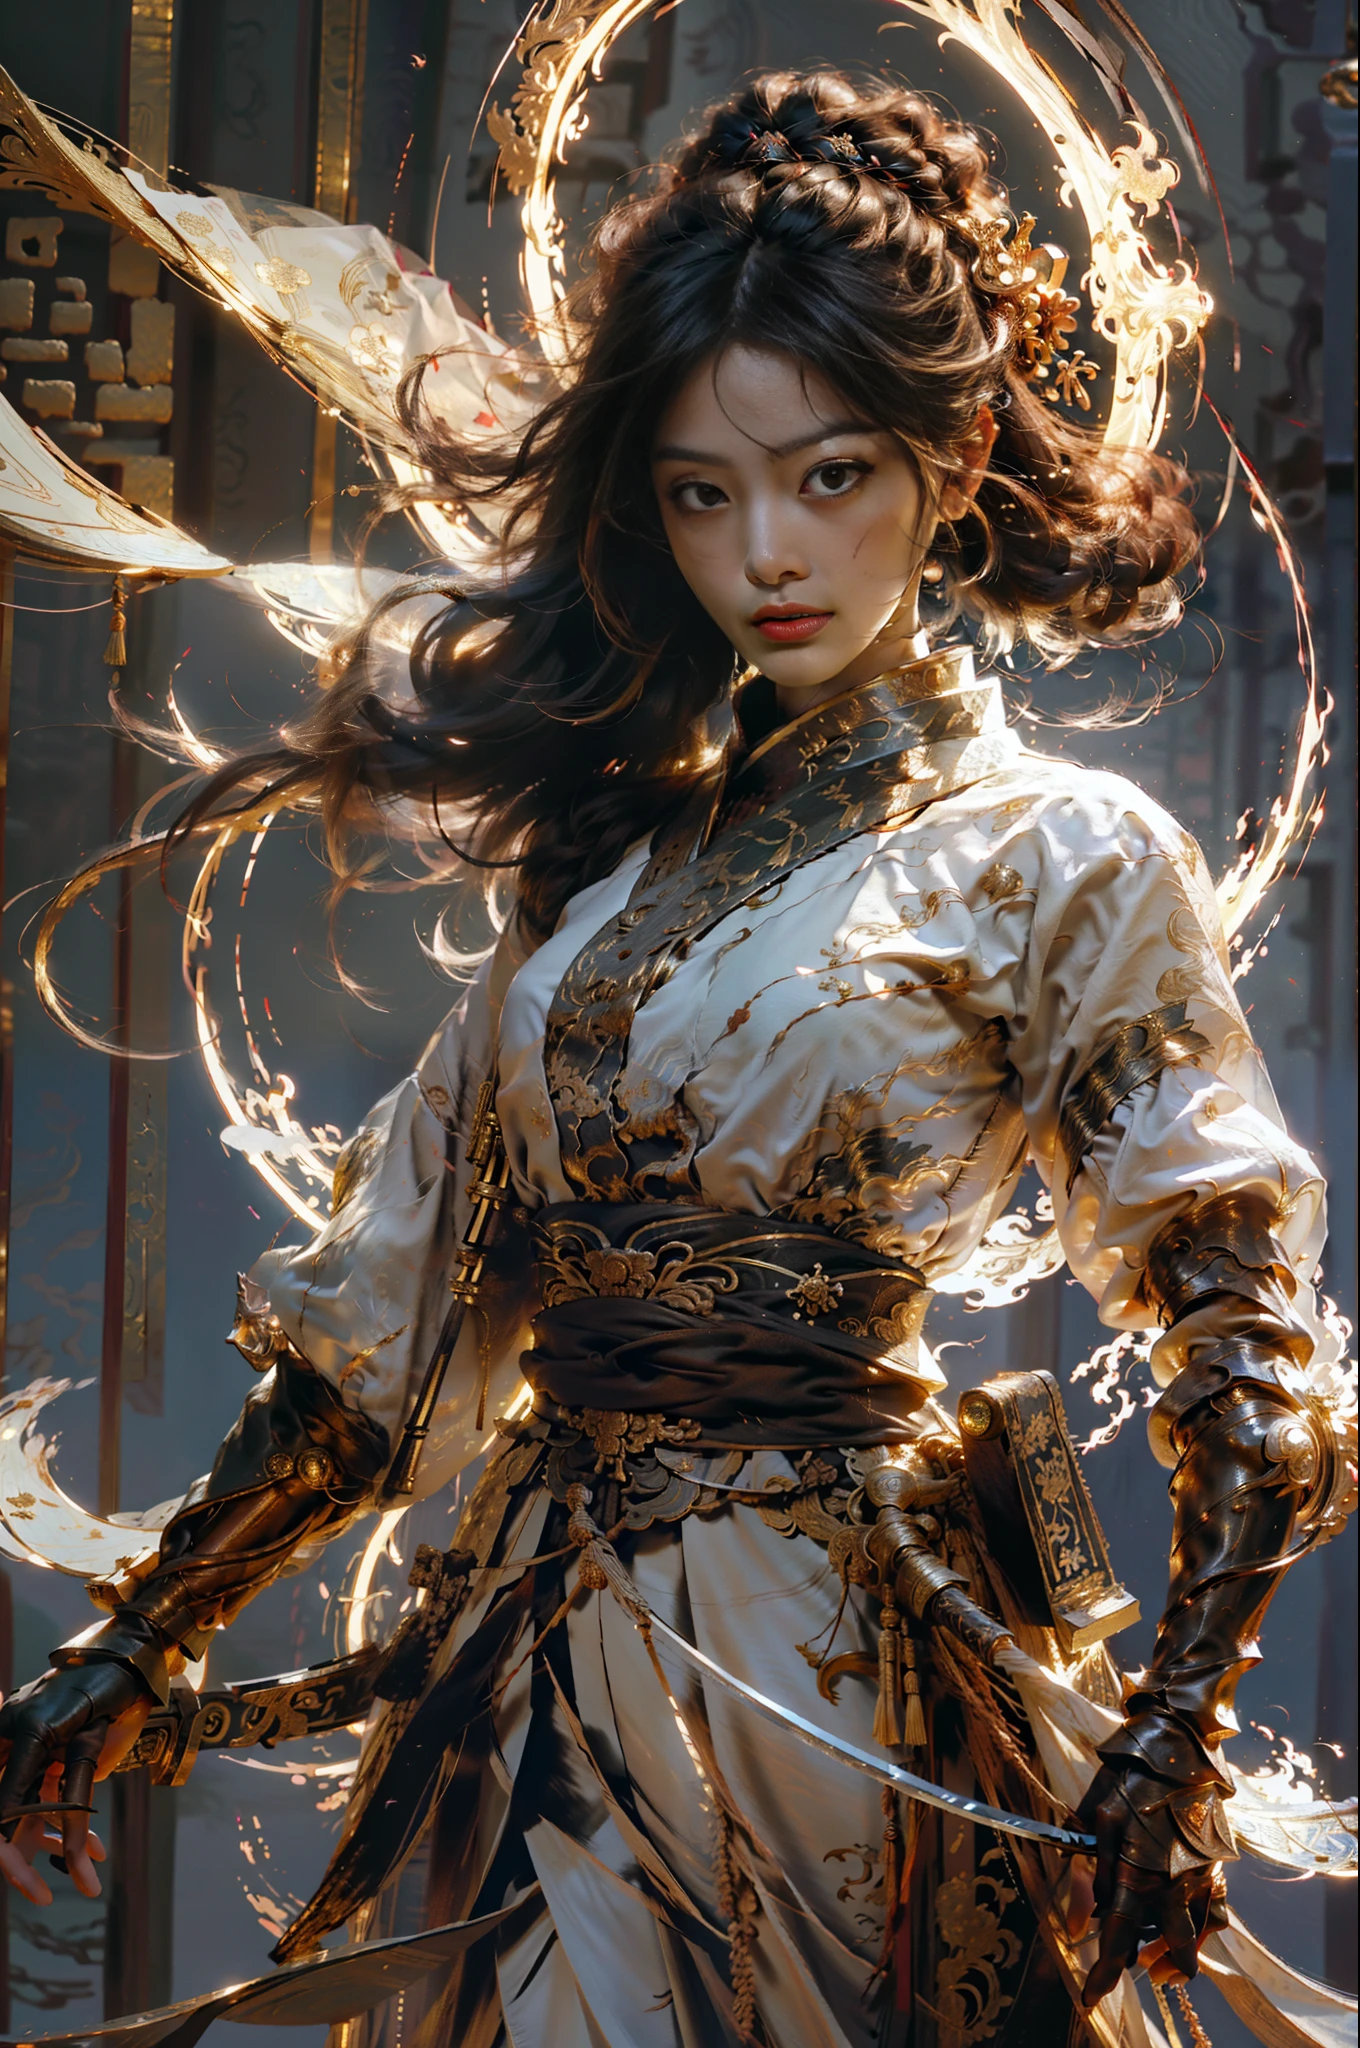 Best Quality, Masterpiece, Ultra High Resolution, (Realism: 1.4), Original Photo, 1Girl, Perfect Face, Delicate Facial Features, Perfect Hands, Delicate Eyelashes, Delicate Eyes, Complex Textures, Gorgeous Armor, Chinese Weapon, Floating Sword, Flame, Light, Serious Expression, Complex Background, Chinese Palace